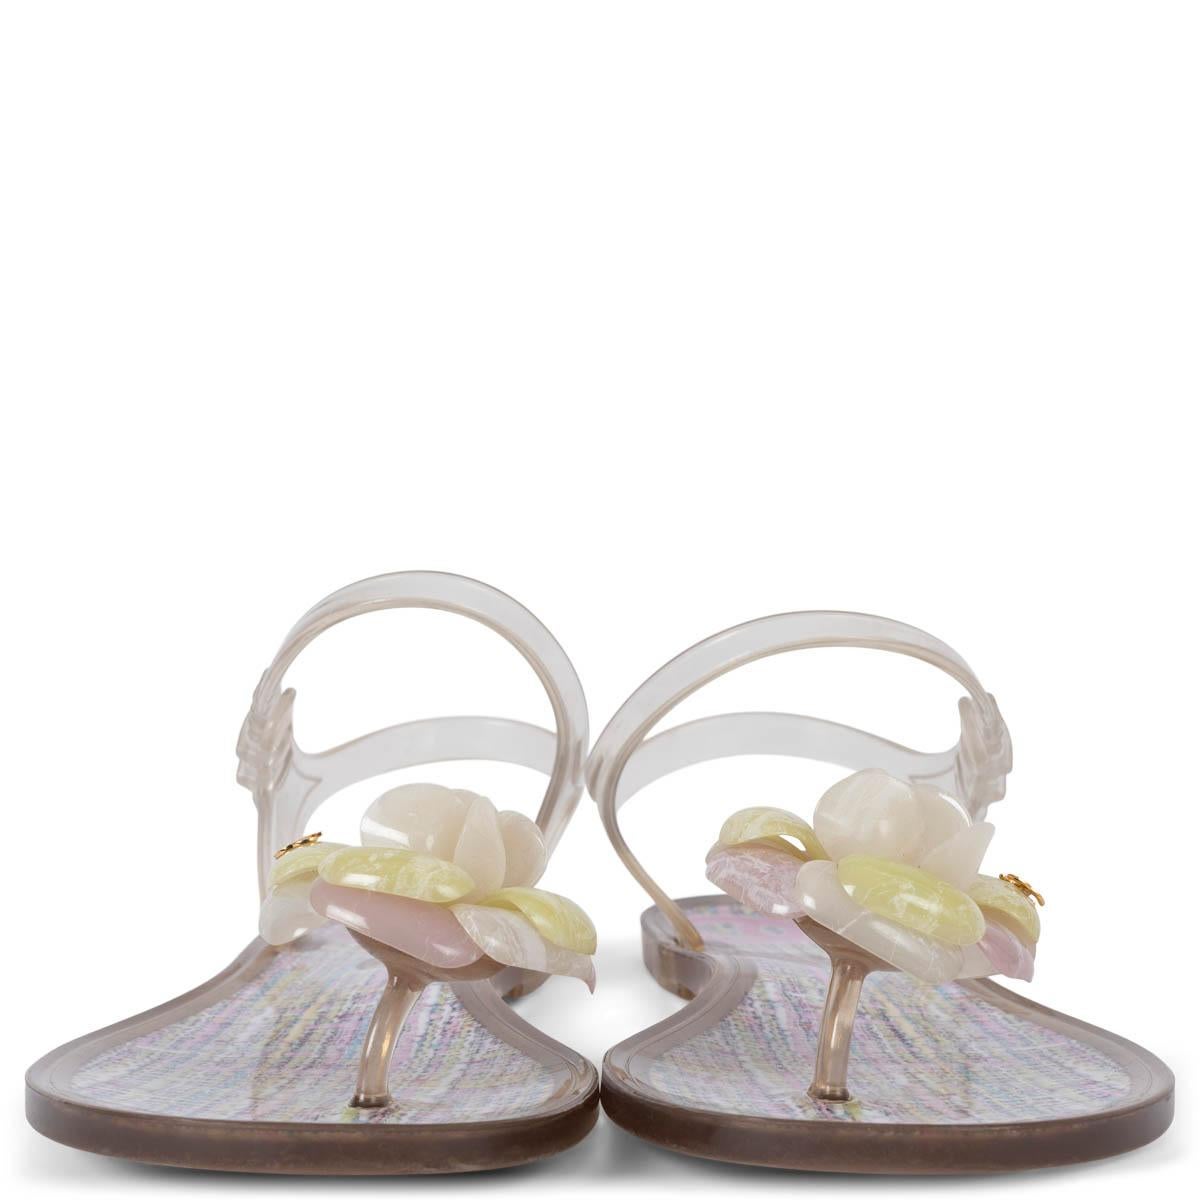 100% authentic Chanel Camellia thong sandals in clear, lila, lime green and white rubber. Have been worn and are in excellent condition. 

Measurements
Model	13C G28878 Y15053
Imprinted Size	38
Shoe Size	38
Inside Sole	25cm (9.8in)
Width	8.5cm